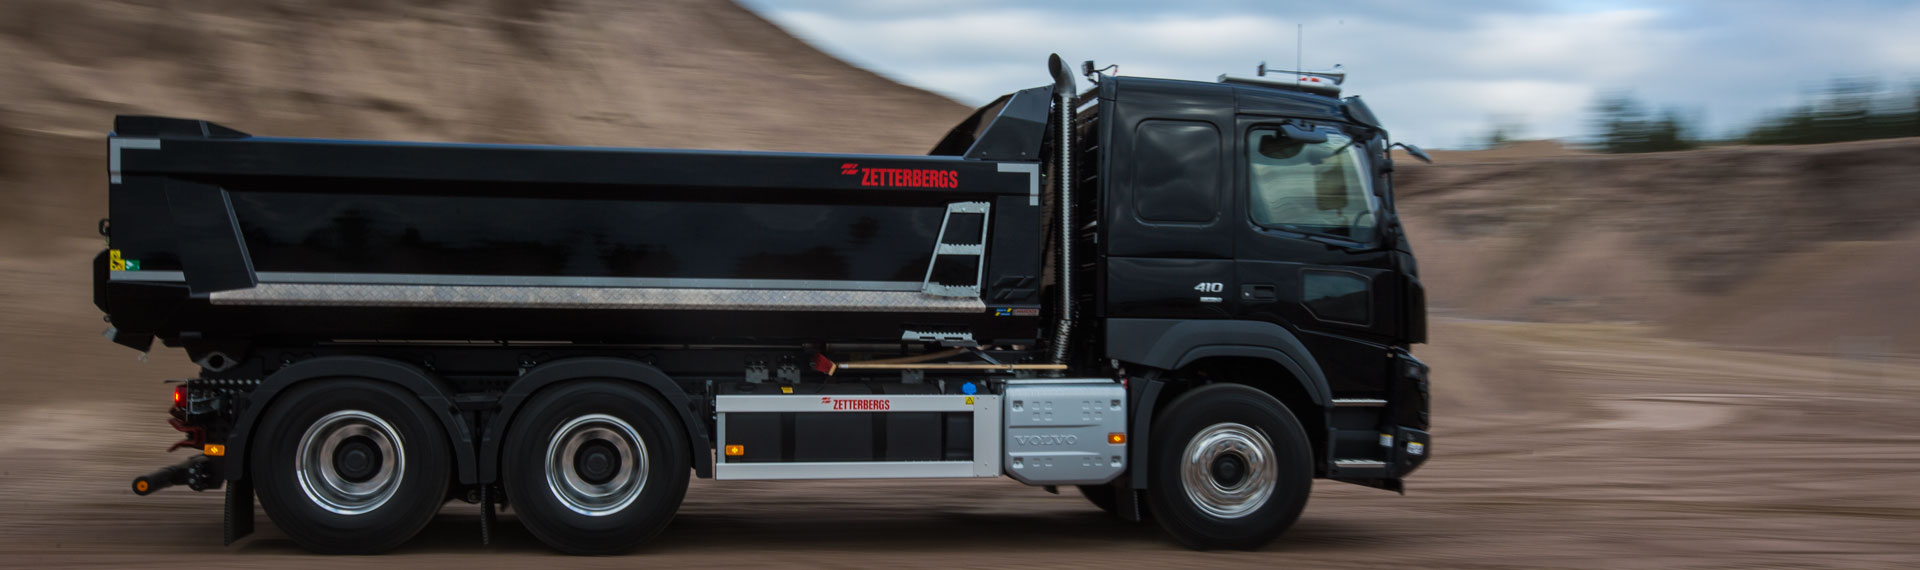 Tipper truck in Hardox 500 Tuf with a conical side panel design